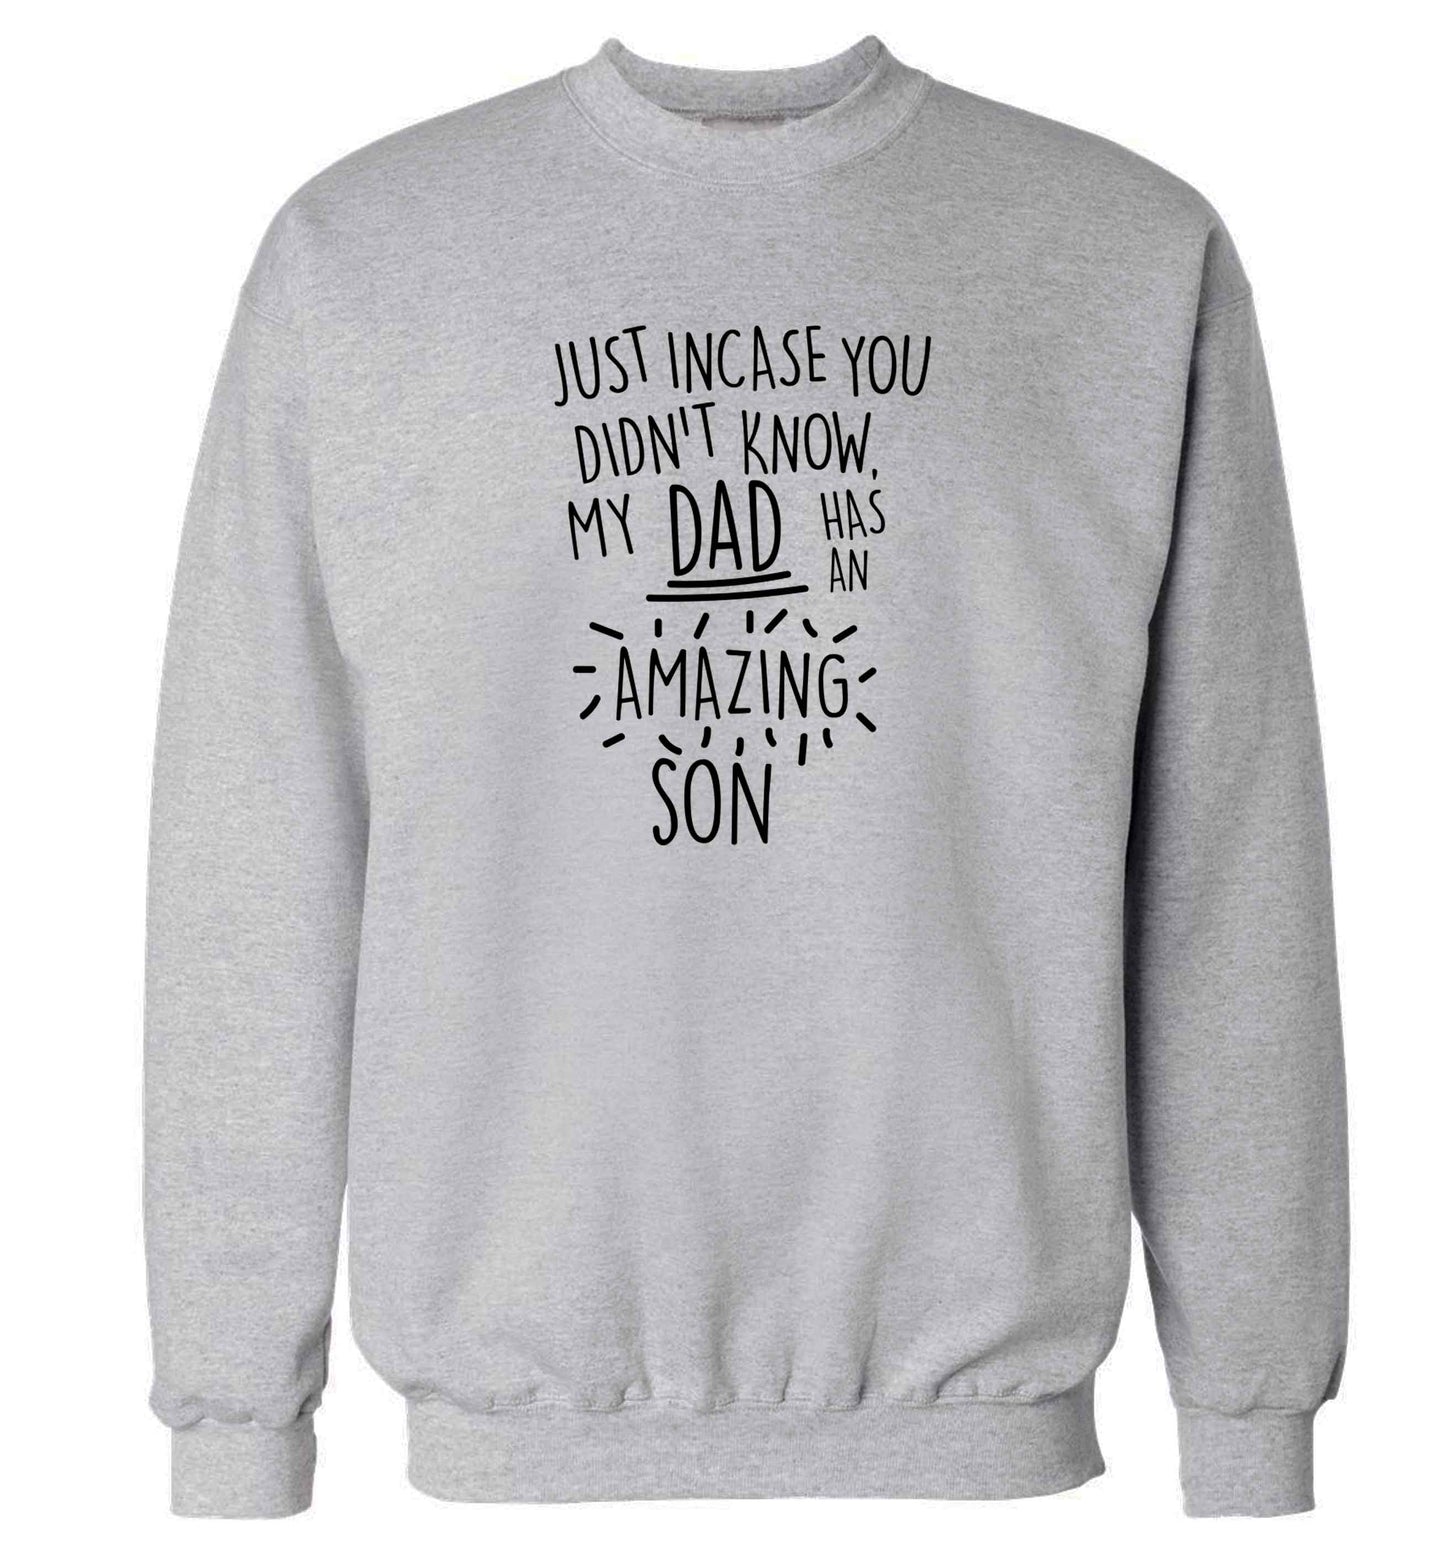 Just incase you didn't know my dad has an amazing son adult's unisex grey sweater 2XL